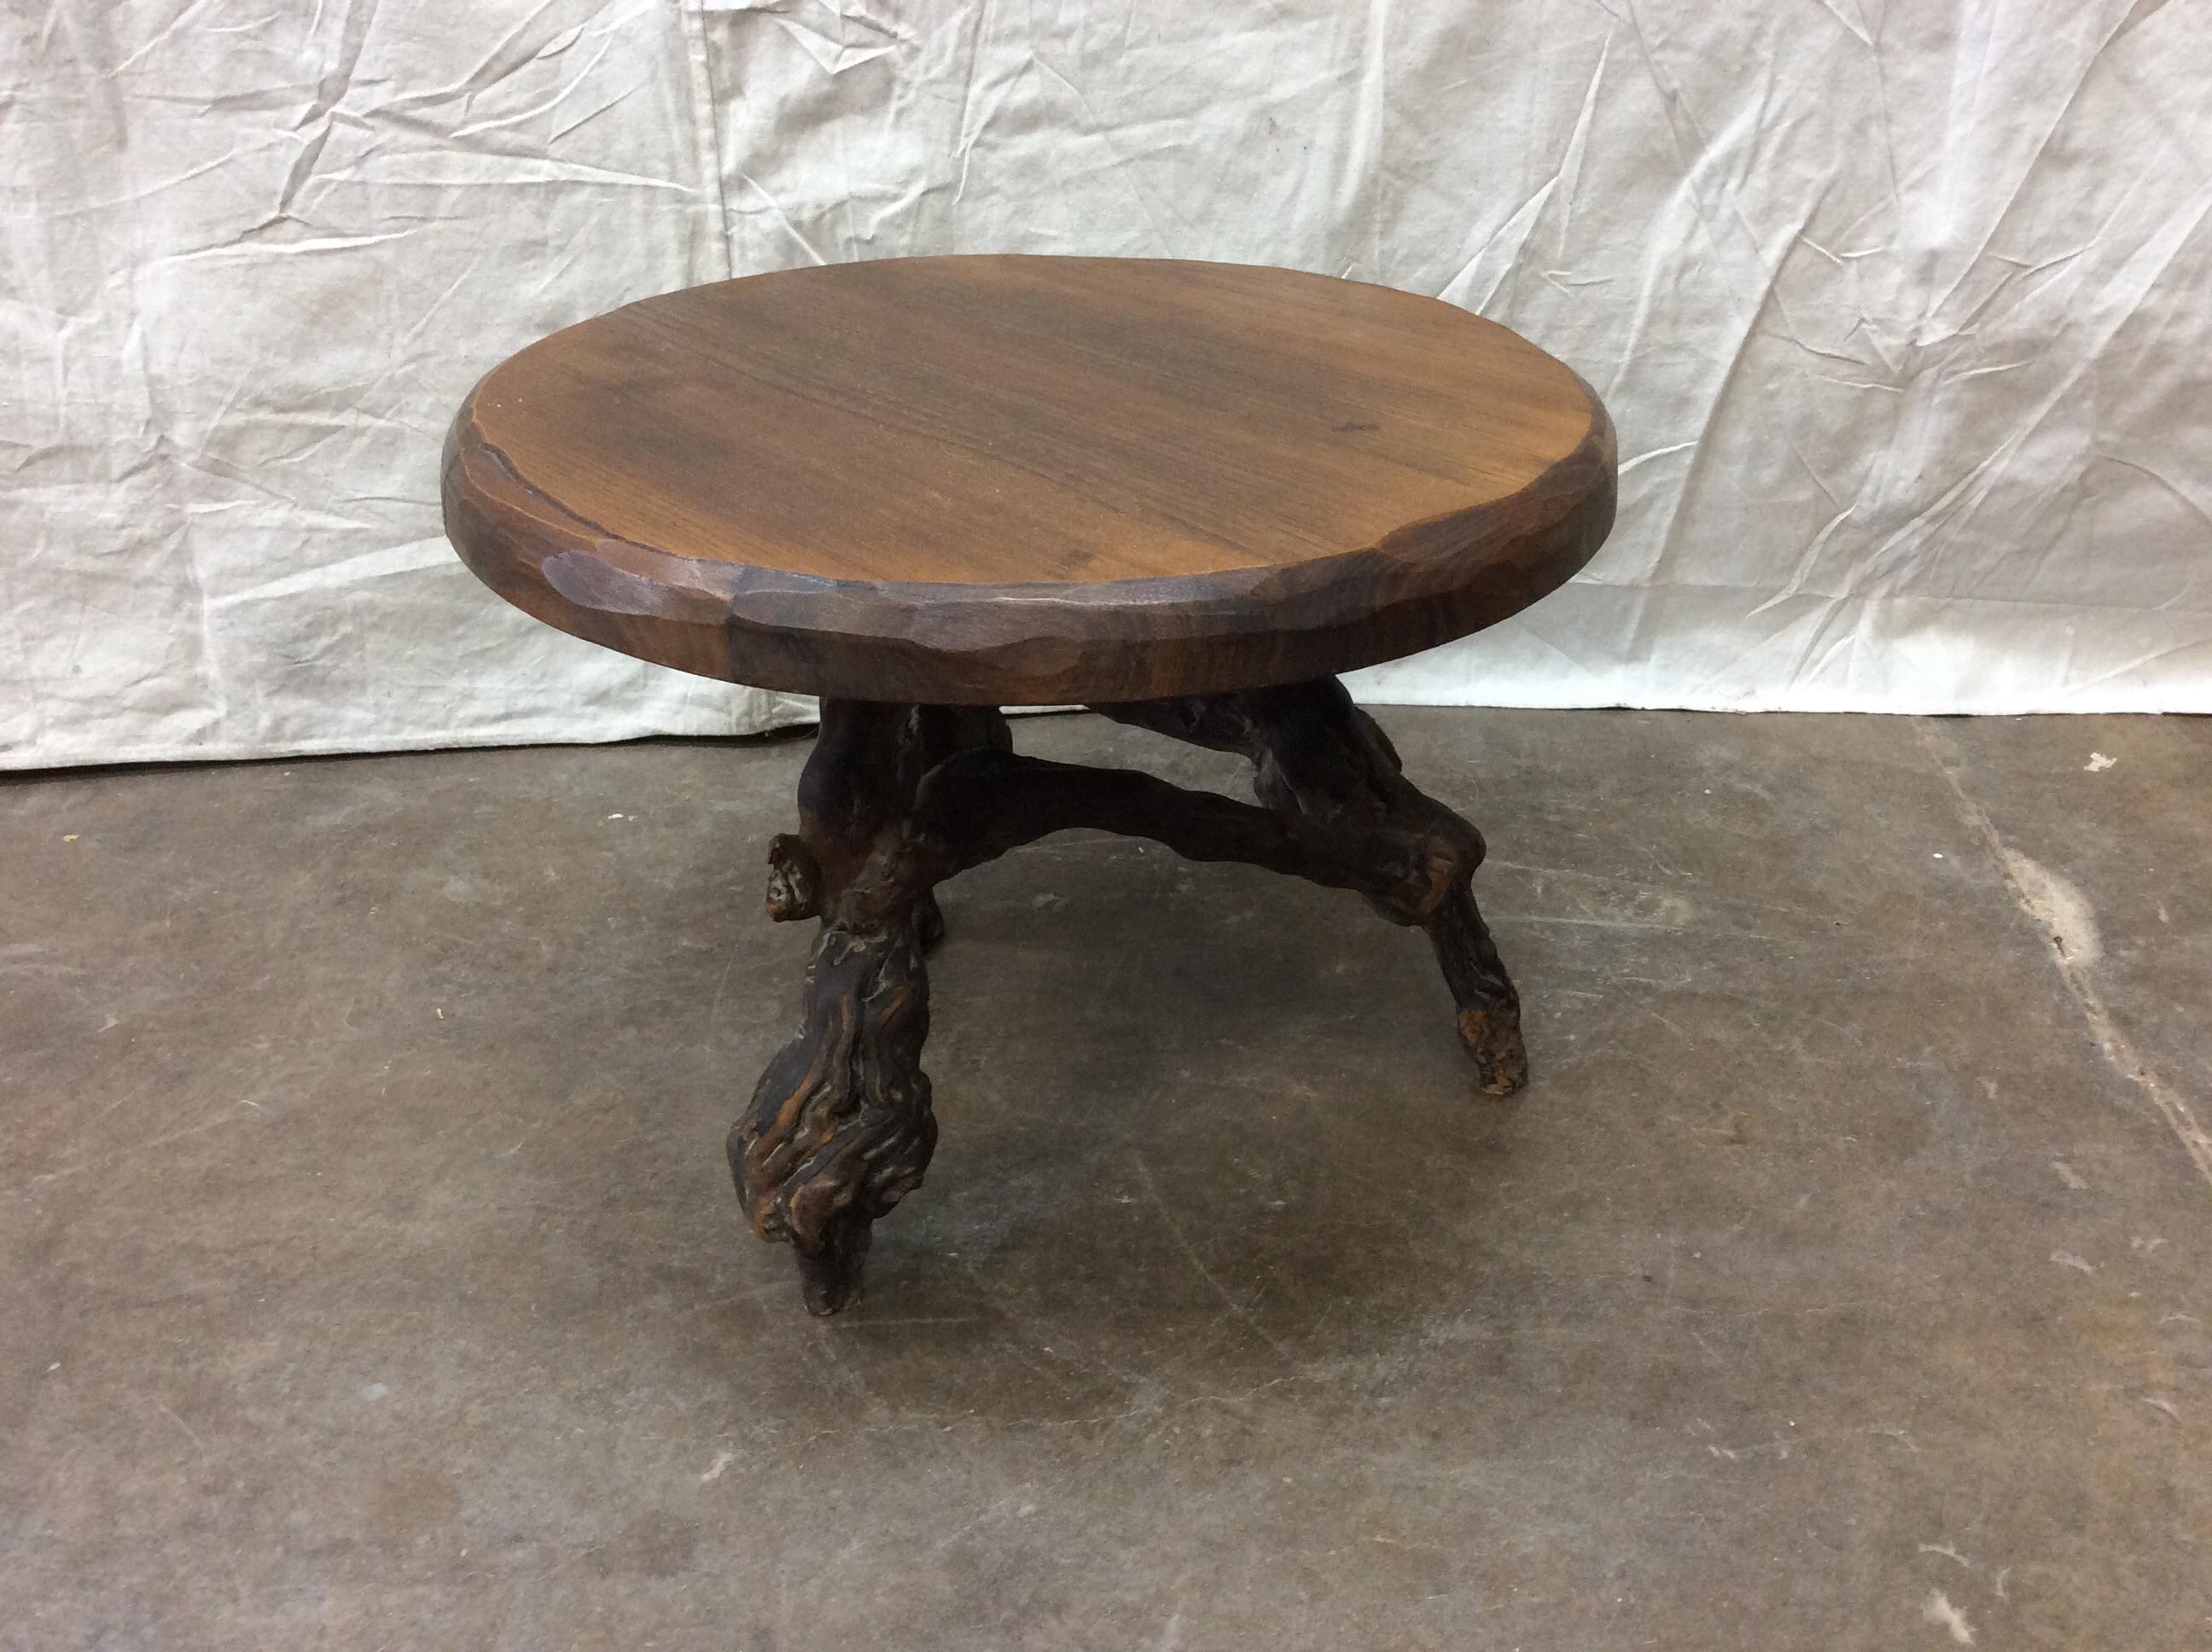 A French small sized coffee or side table with grapevine base from the early 20th century. This table features a round-shaped wood slab top with carved scalloped edges, with a natural grapevine base. The grapevine base is made up of triangulated